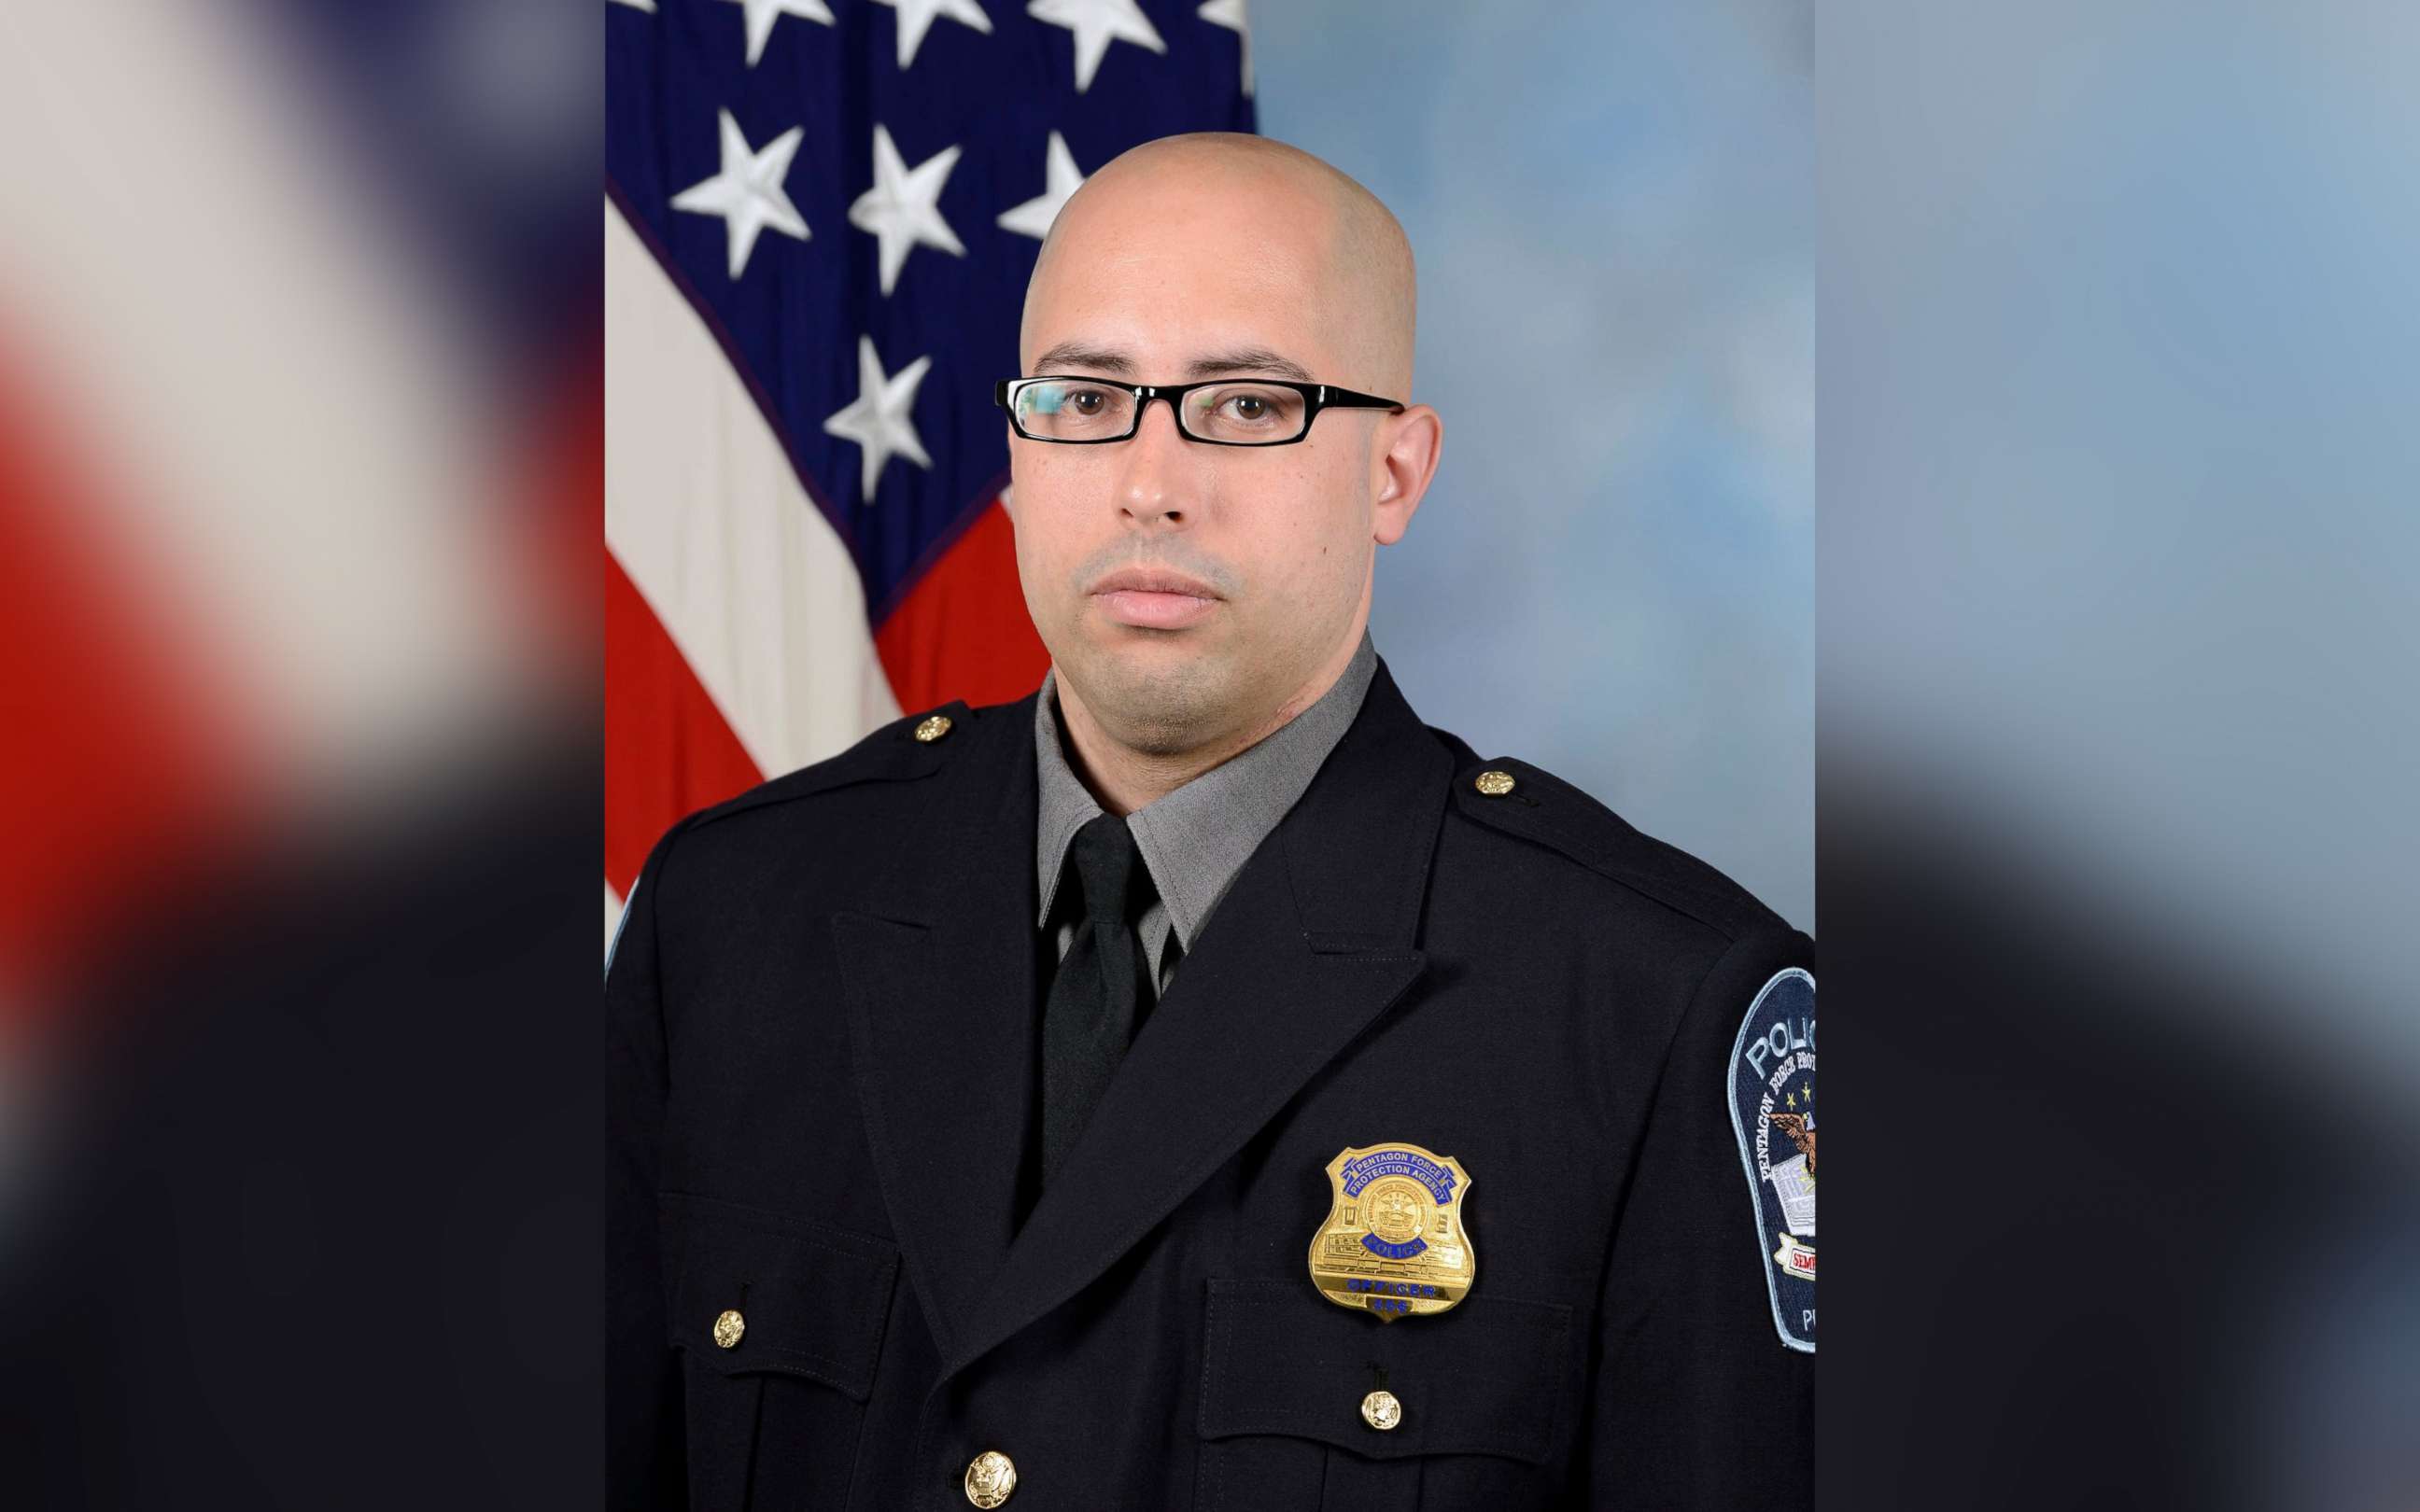 PHOTO: Pentagon Police Officer George Gonzalez, who was killed on Aug. 3, 2021, during an attack at the Pentagon bus platform, is pictured in an undated handout image.